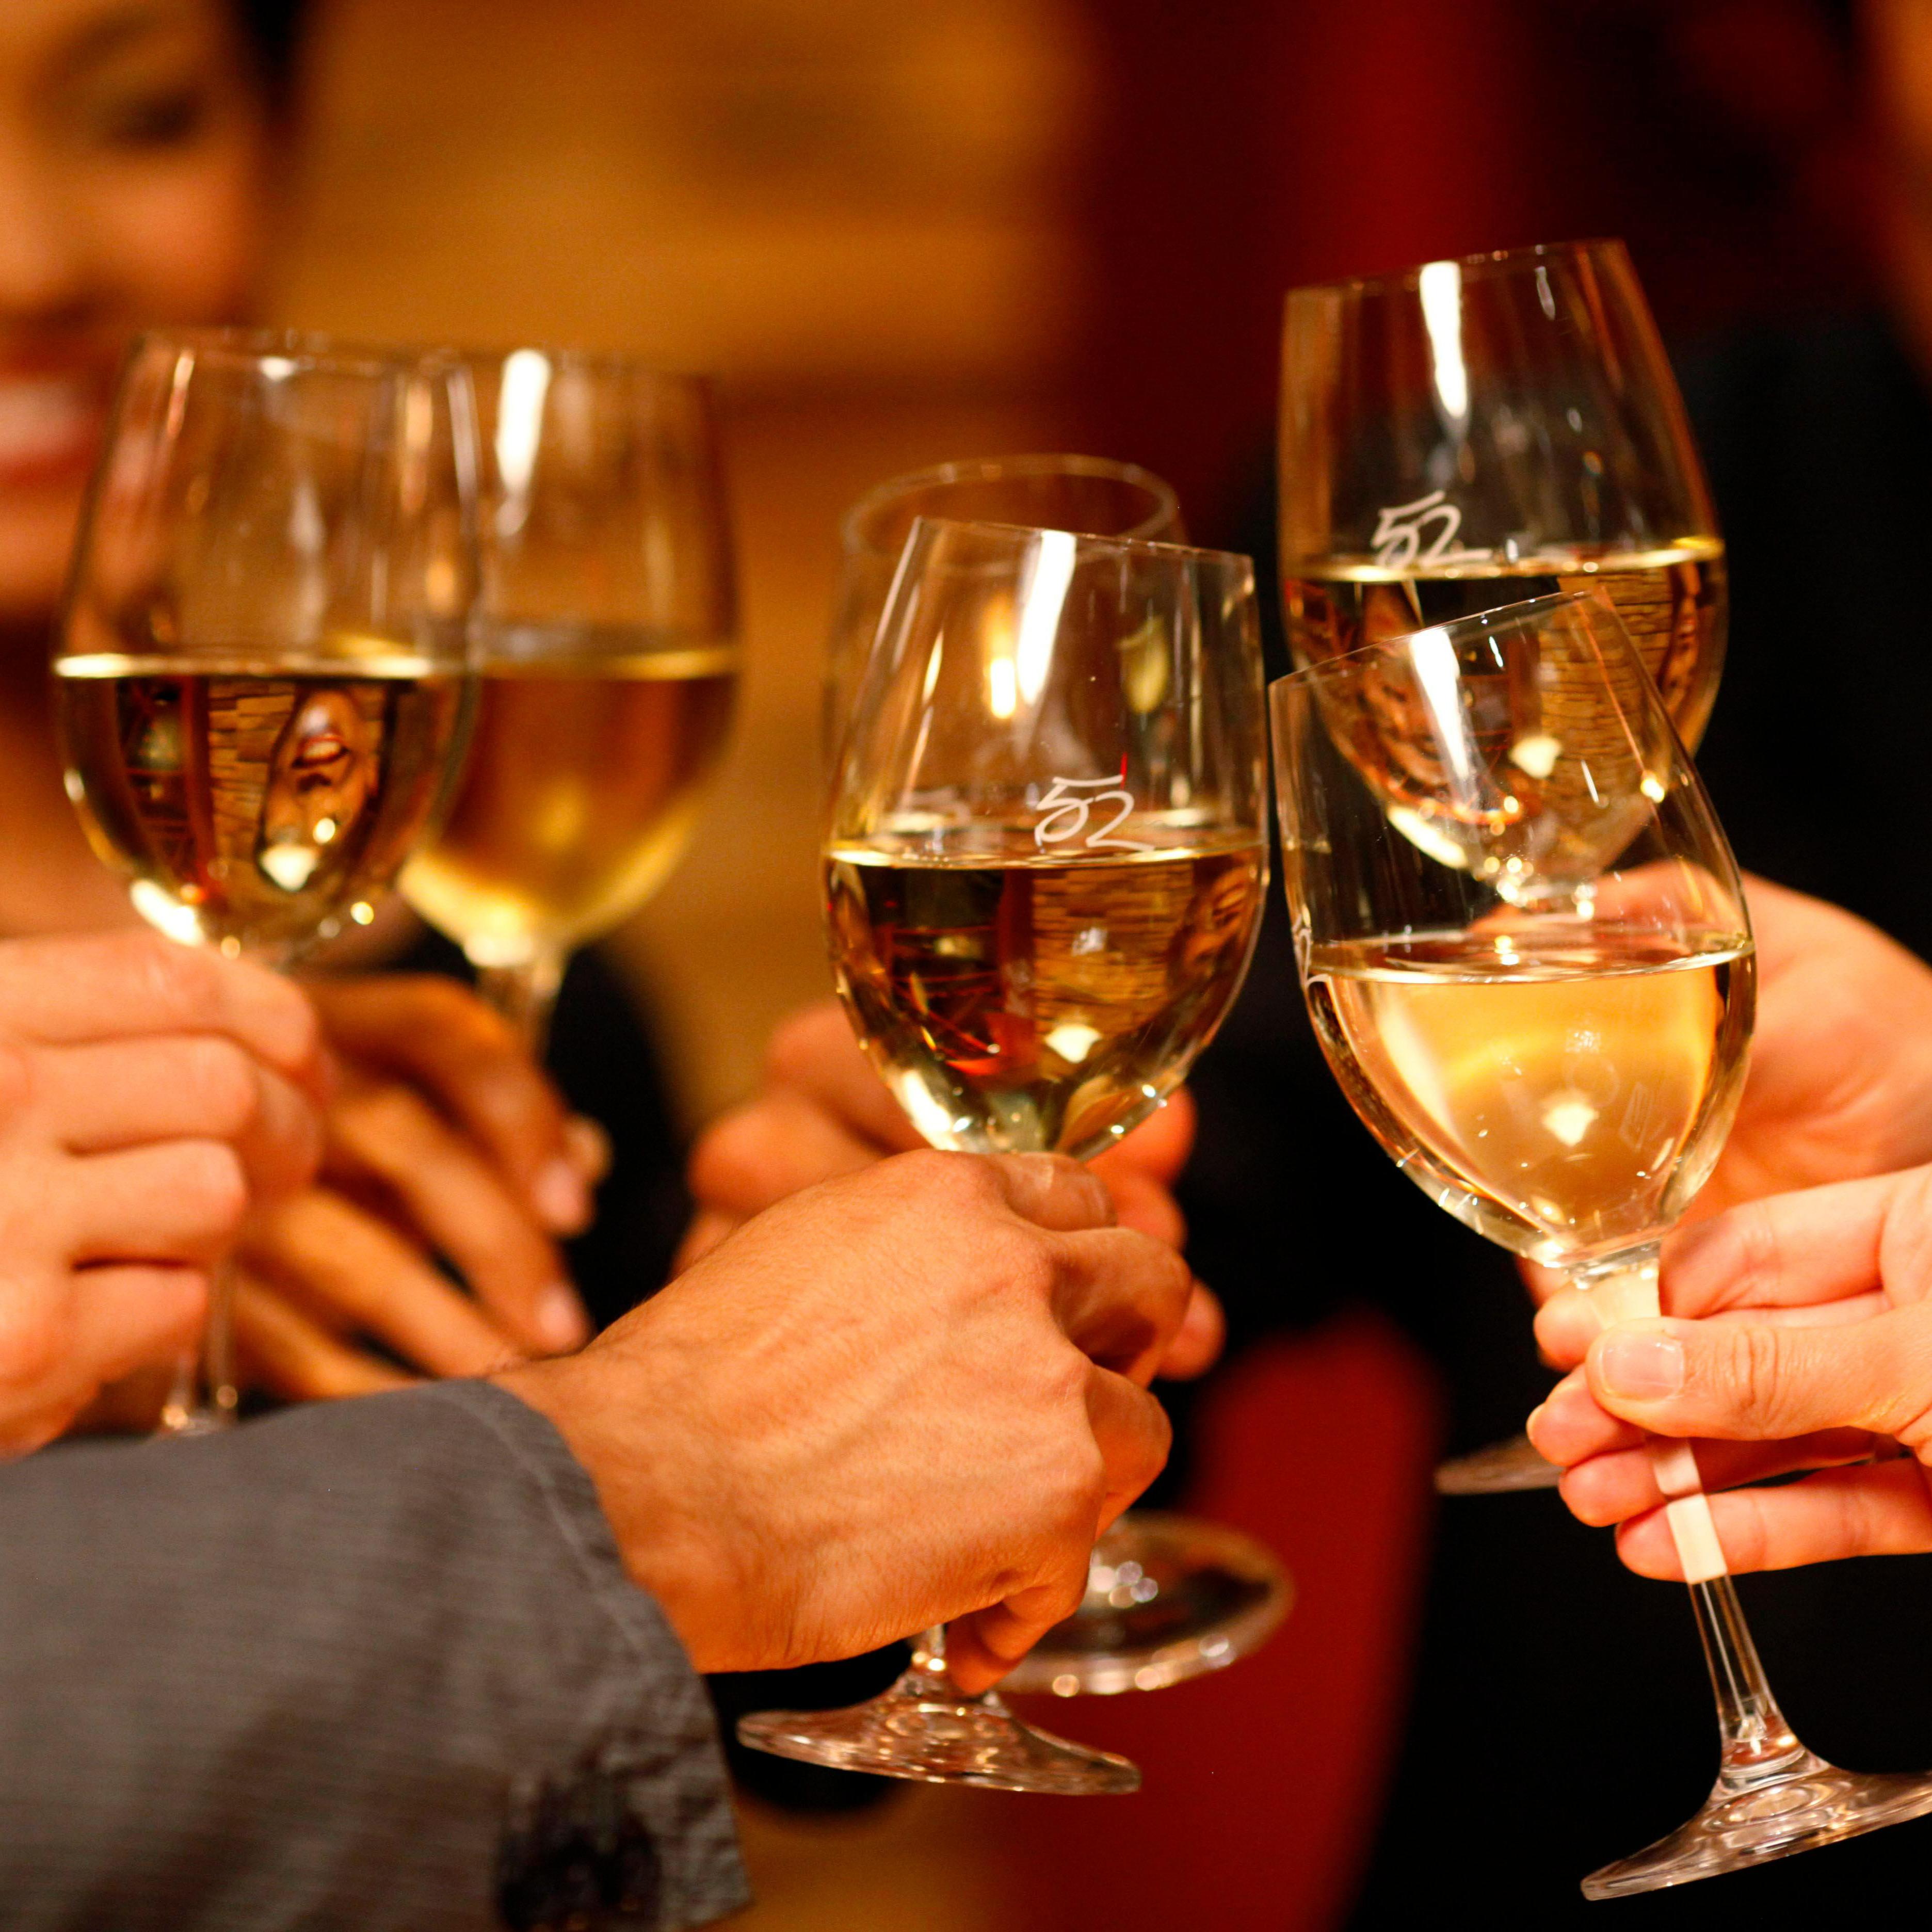 Seasons 52 has a wide selection of varietals on our wine menu